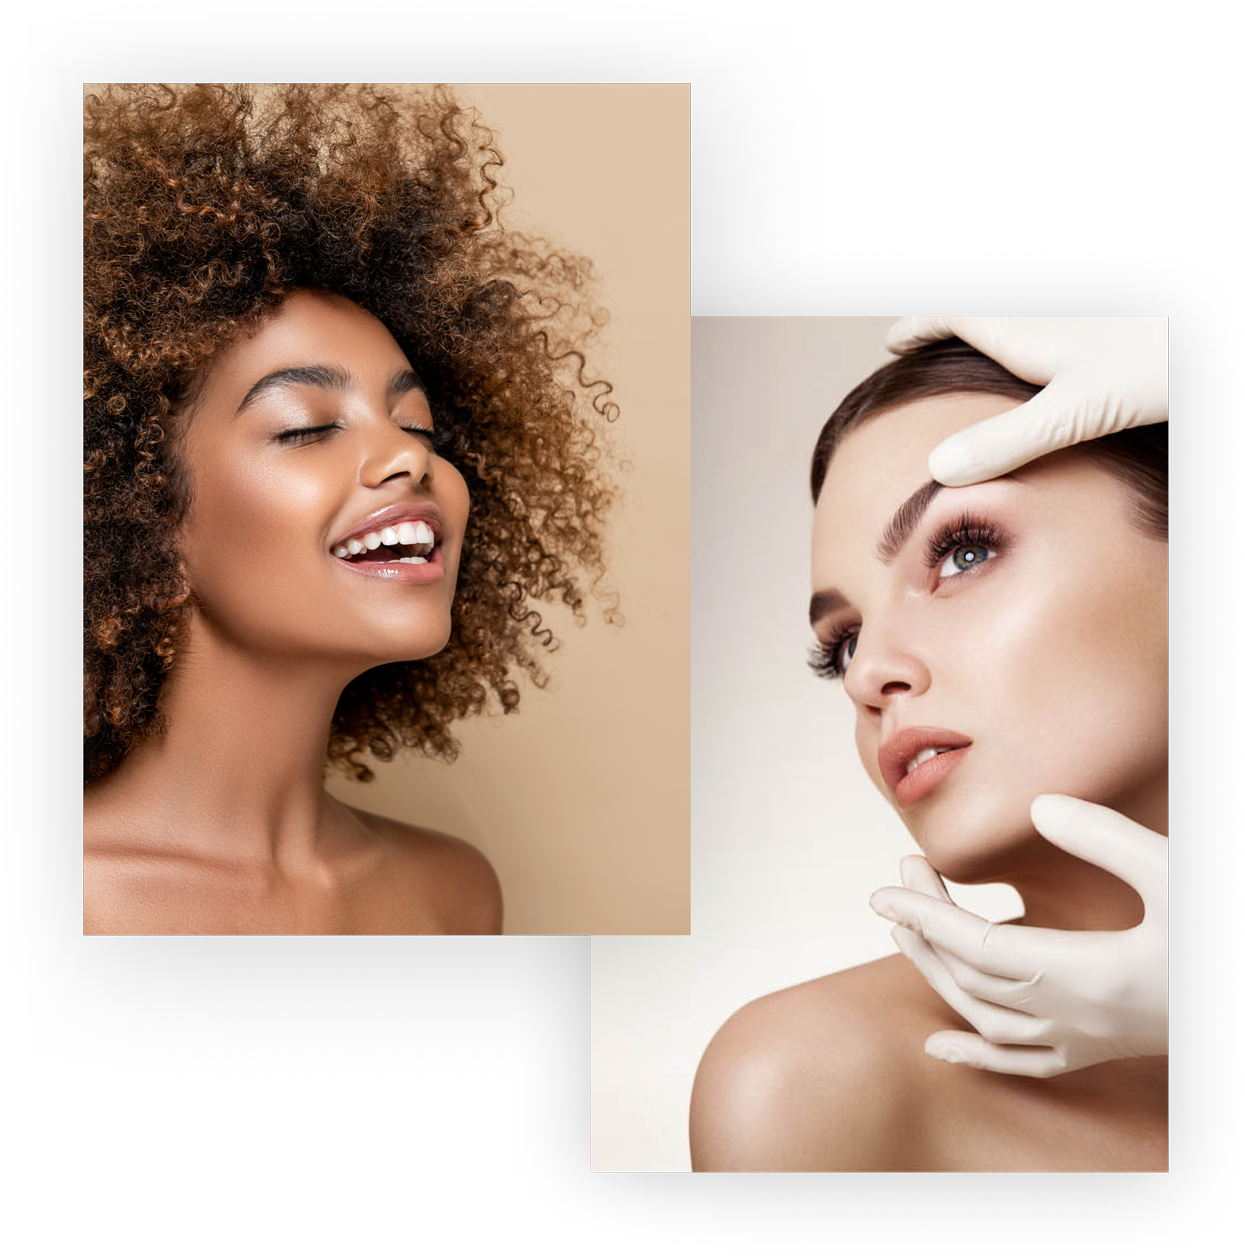 Dark Skinned model with curly hair and white model having a facial exam